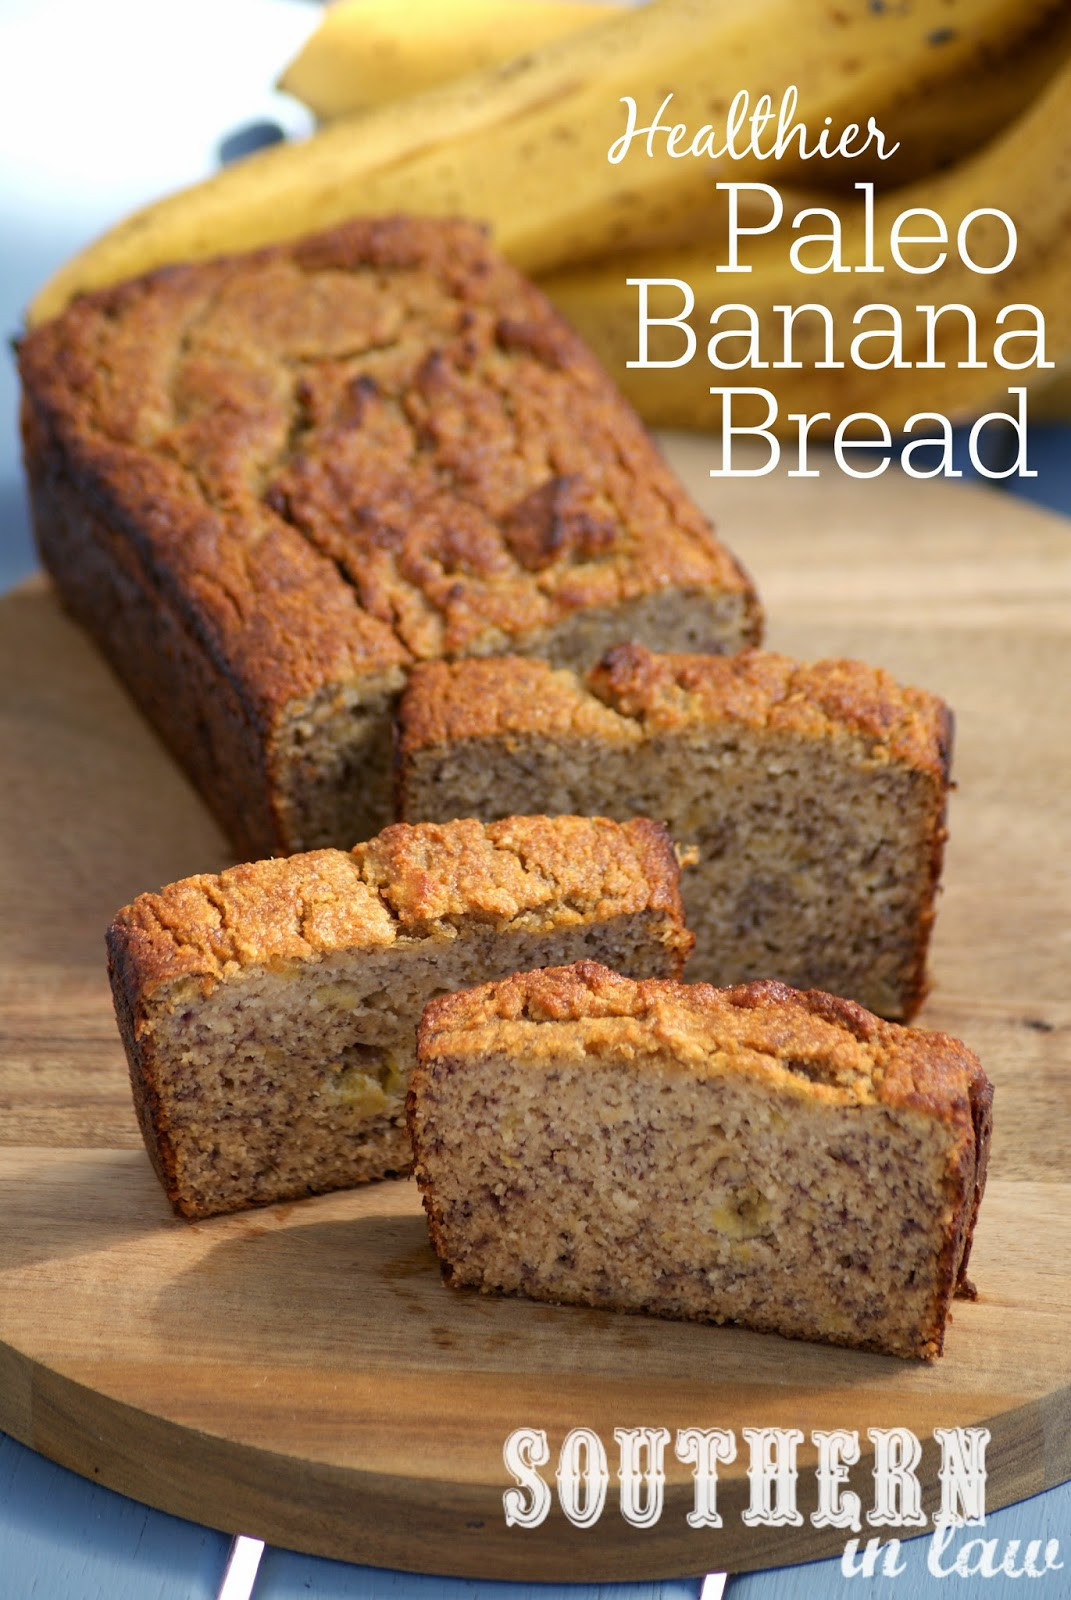 Low Carb Bread Recipes Healthy
 Southern In Law Recipe The Best Healthy Paleo Banana Bread